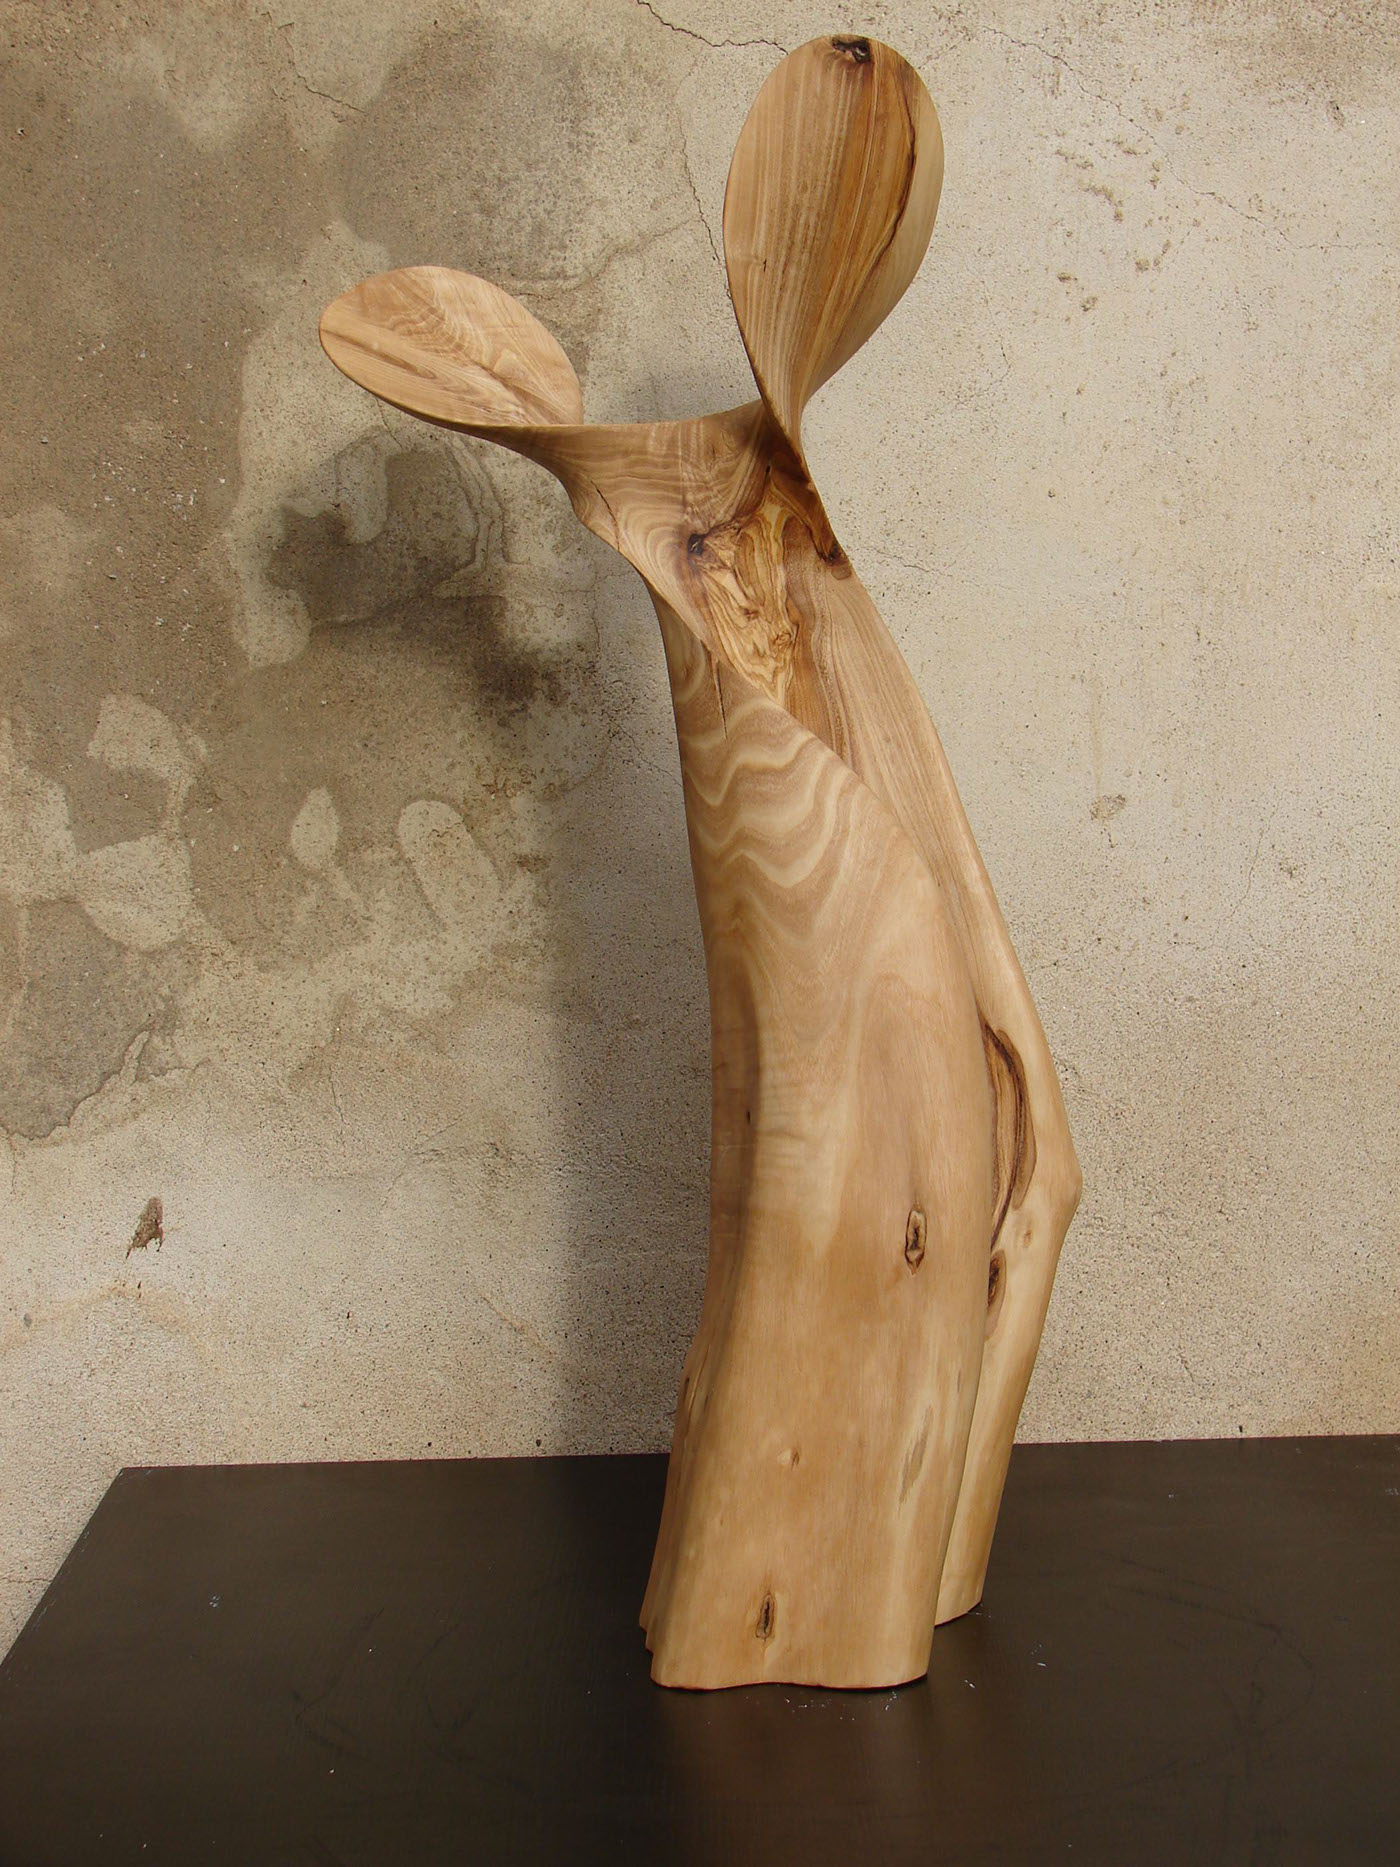 wood woodcarving sculpture